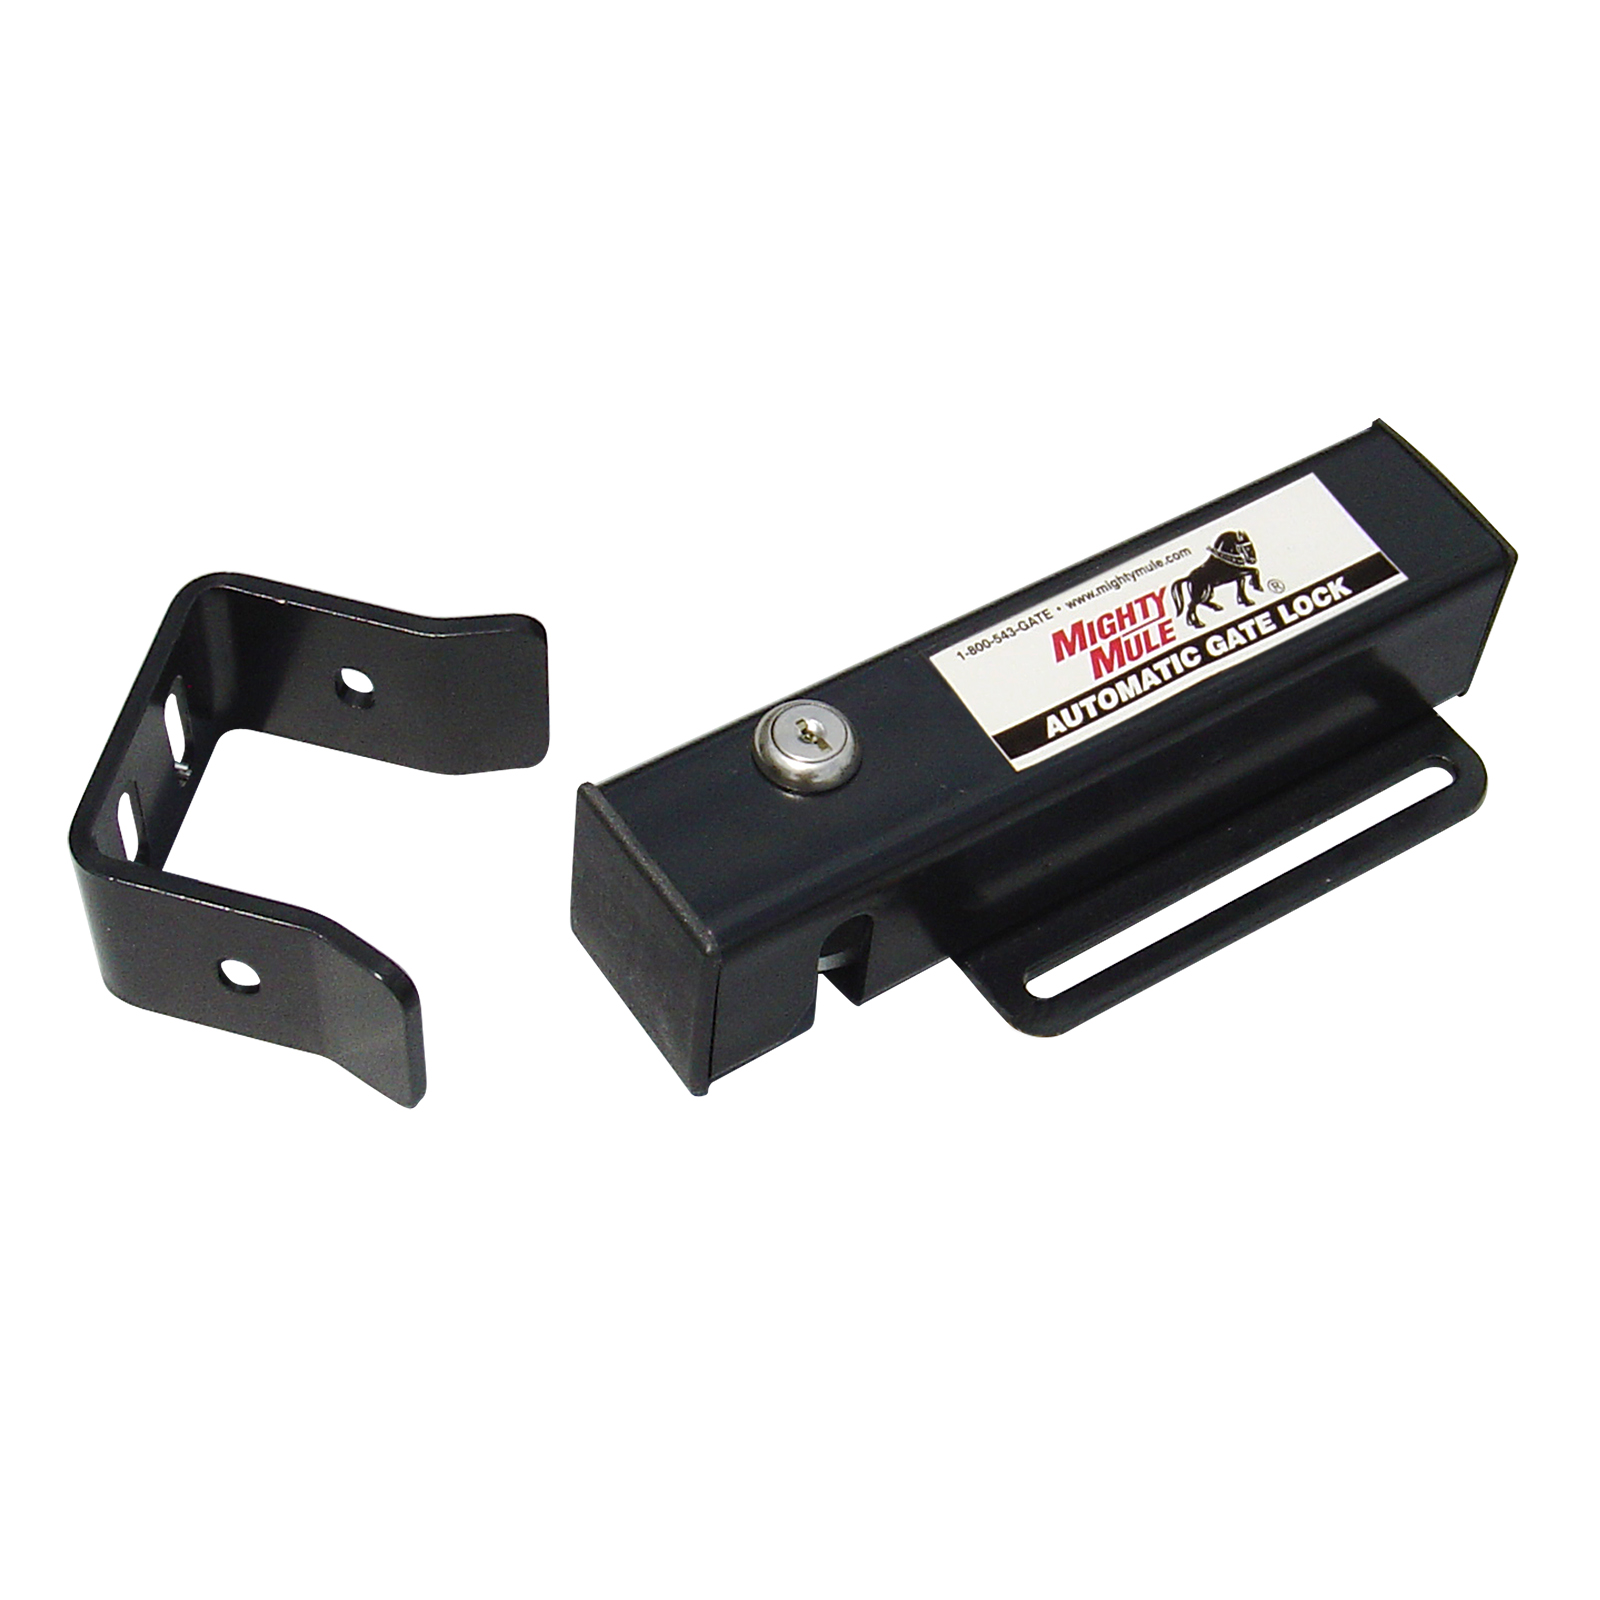 Mighty Mule Horizontal Gate Lock for Automatic Gate Openers